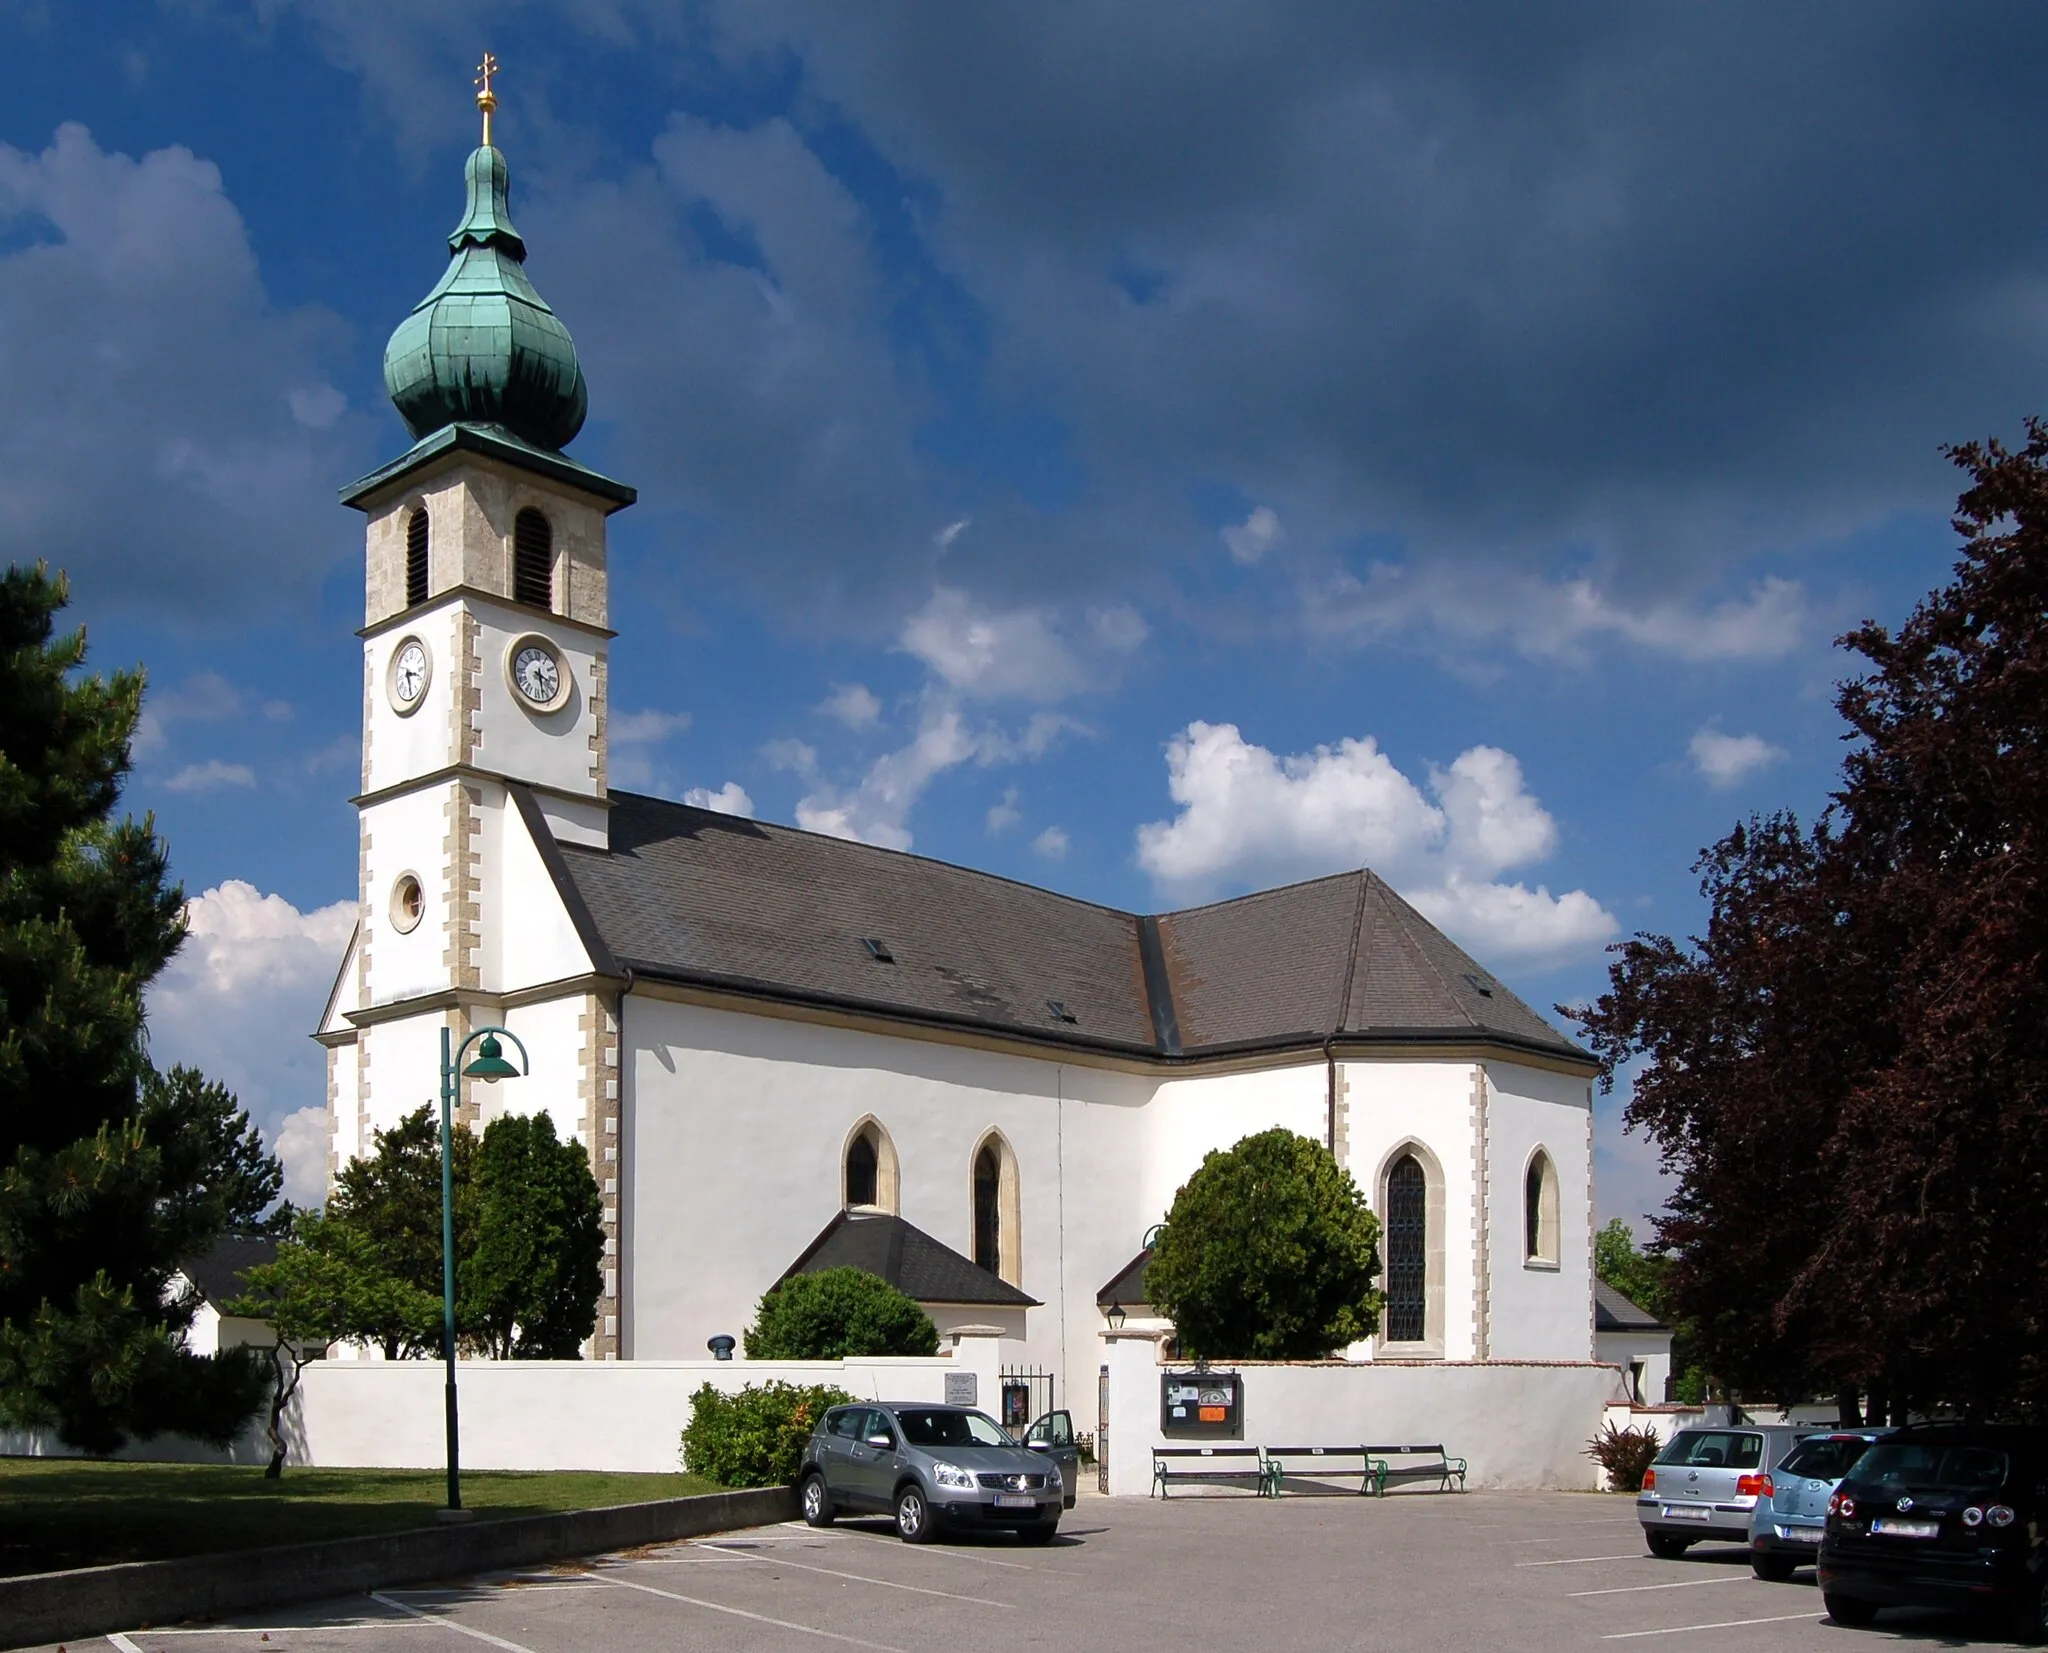 Photo showing: The catholic parish church of Saint John the Baptist in Trumau, Lower Austria, is a cultural heritage monument.